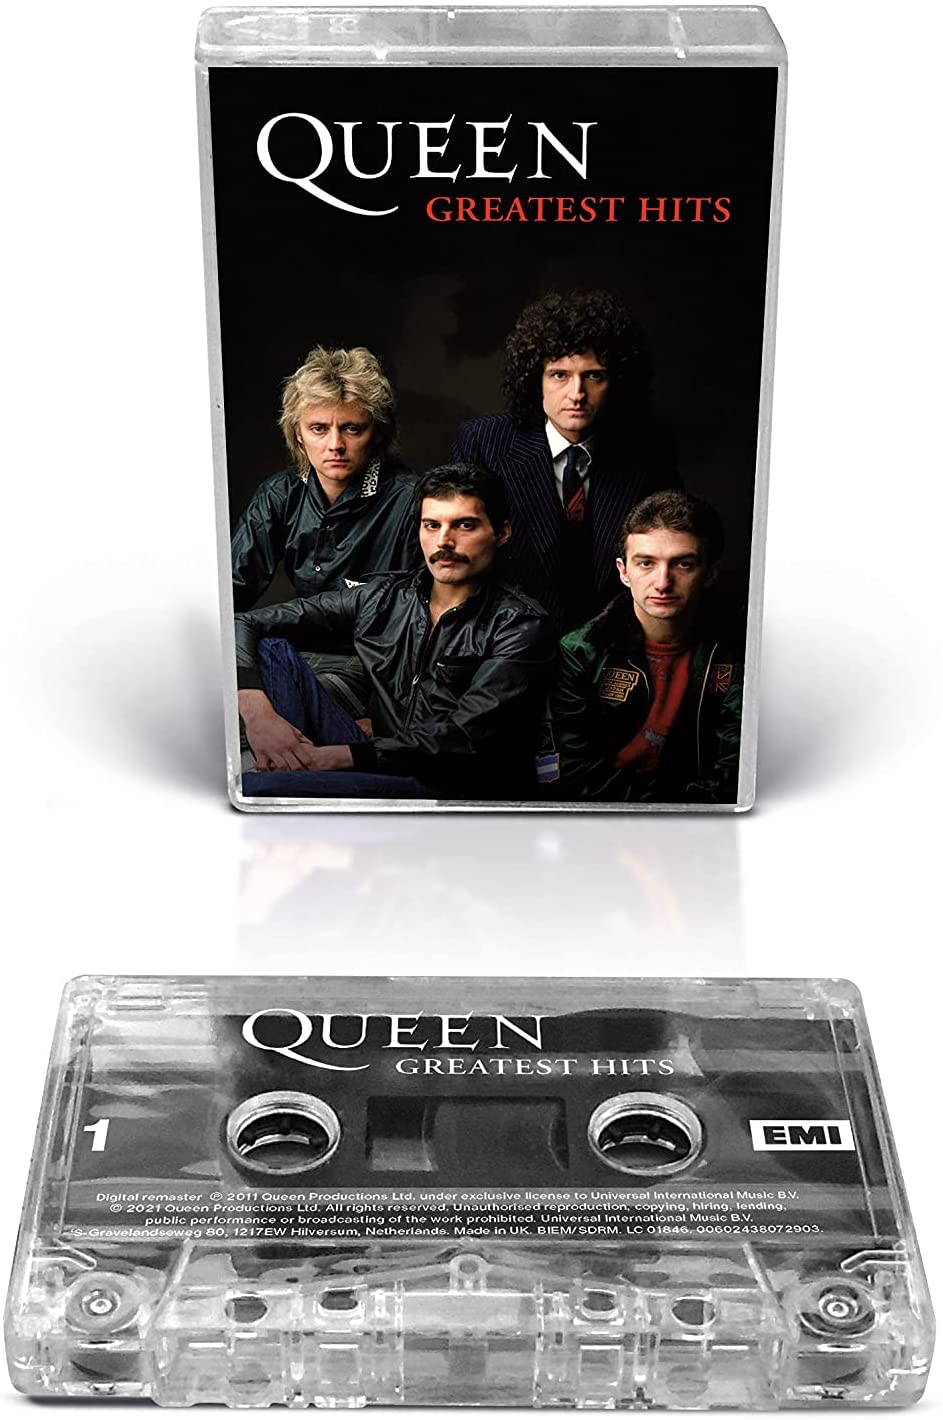 Queen Greatest Hits 2 кассета. Диск кассета Queen. Queen - Greatest Hits. Queen Greatest Hits 1.